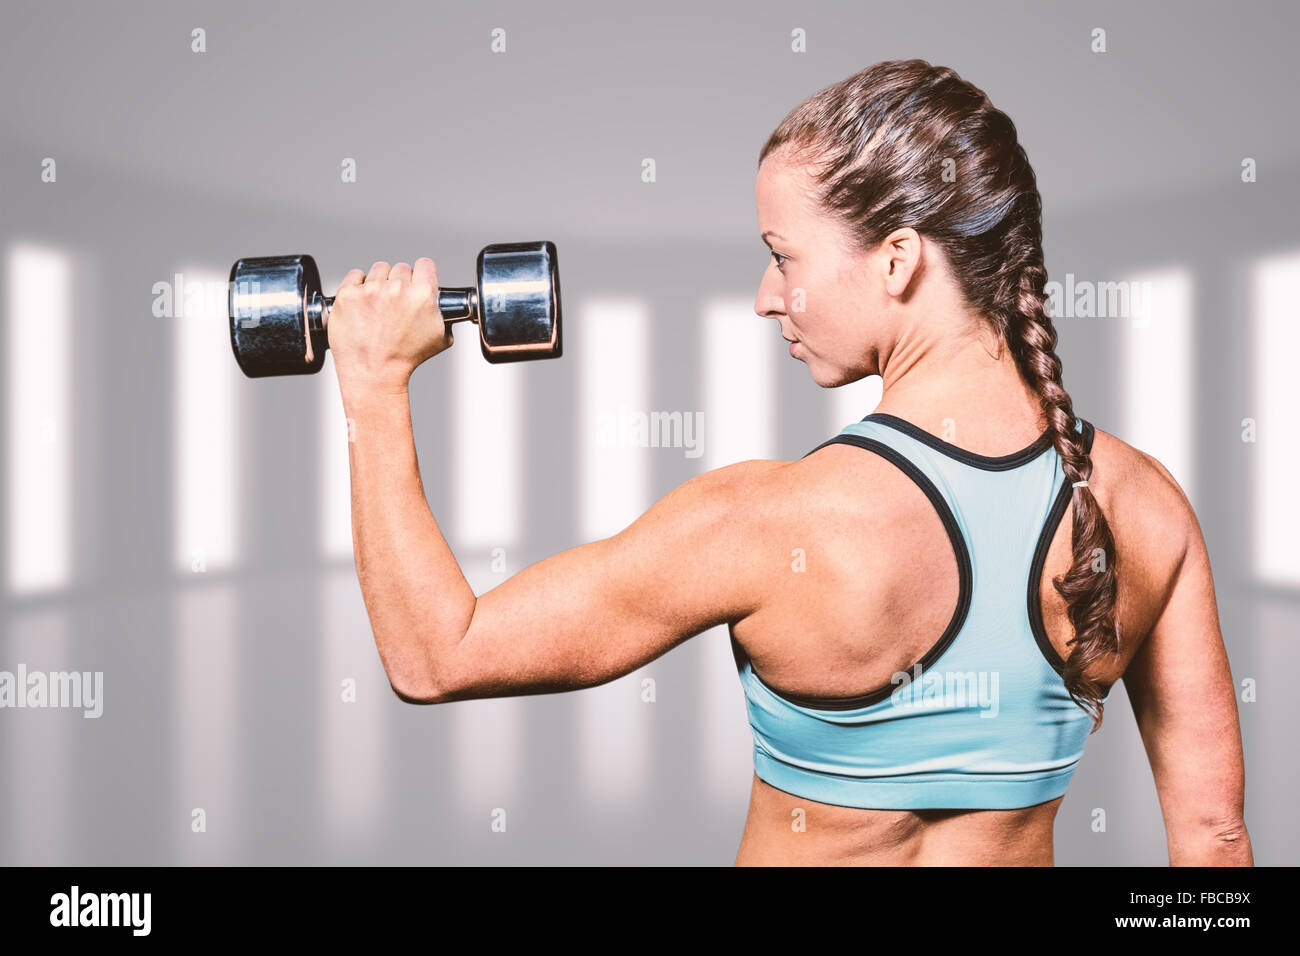 Composite image of rear view of woman lifting dumbbell Stock Photo